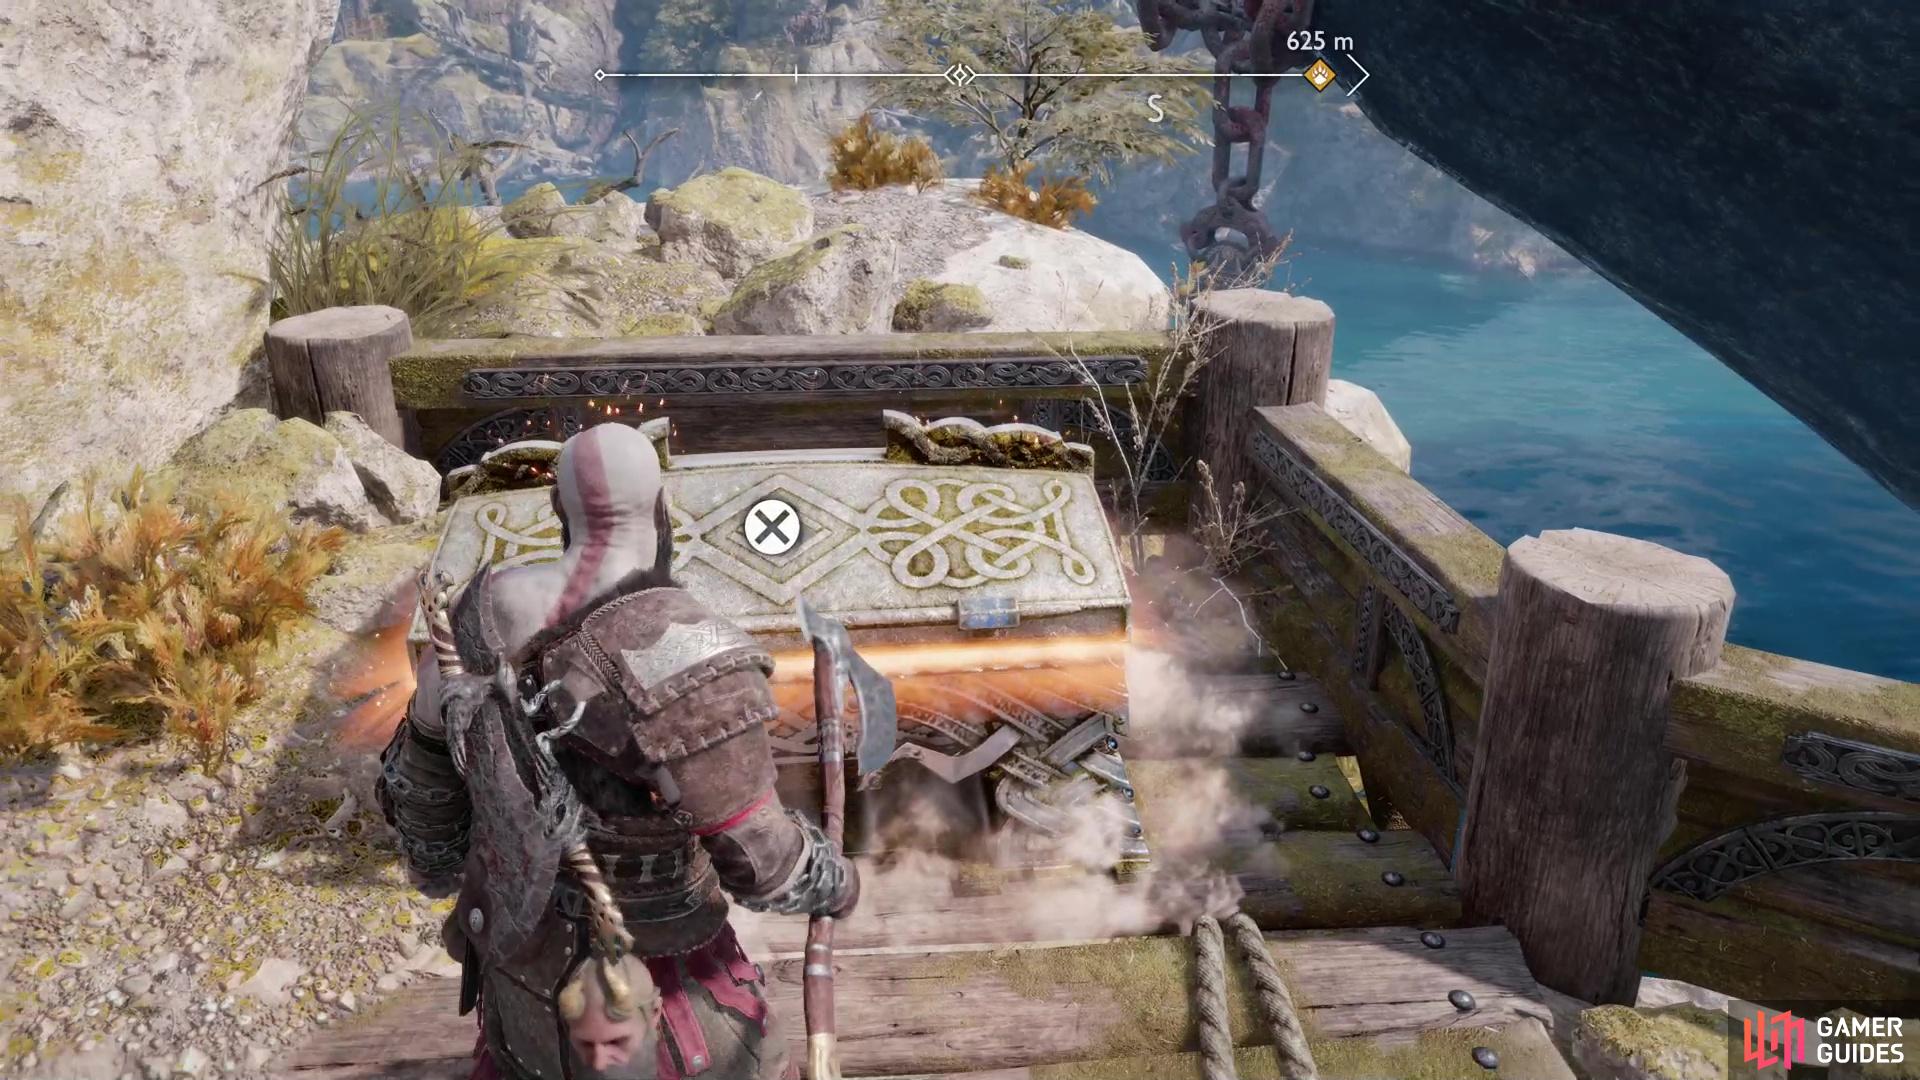 The Legendary Chest technically isn’t on Lyngbakr Island. Instead, slide down a rope after destroying the third Lyngbakr tether to reach the cliff this Legendary Chest is on.